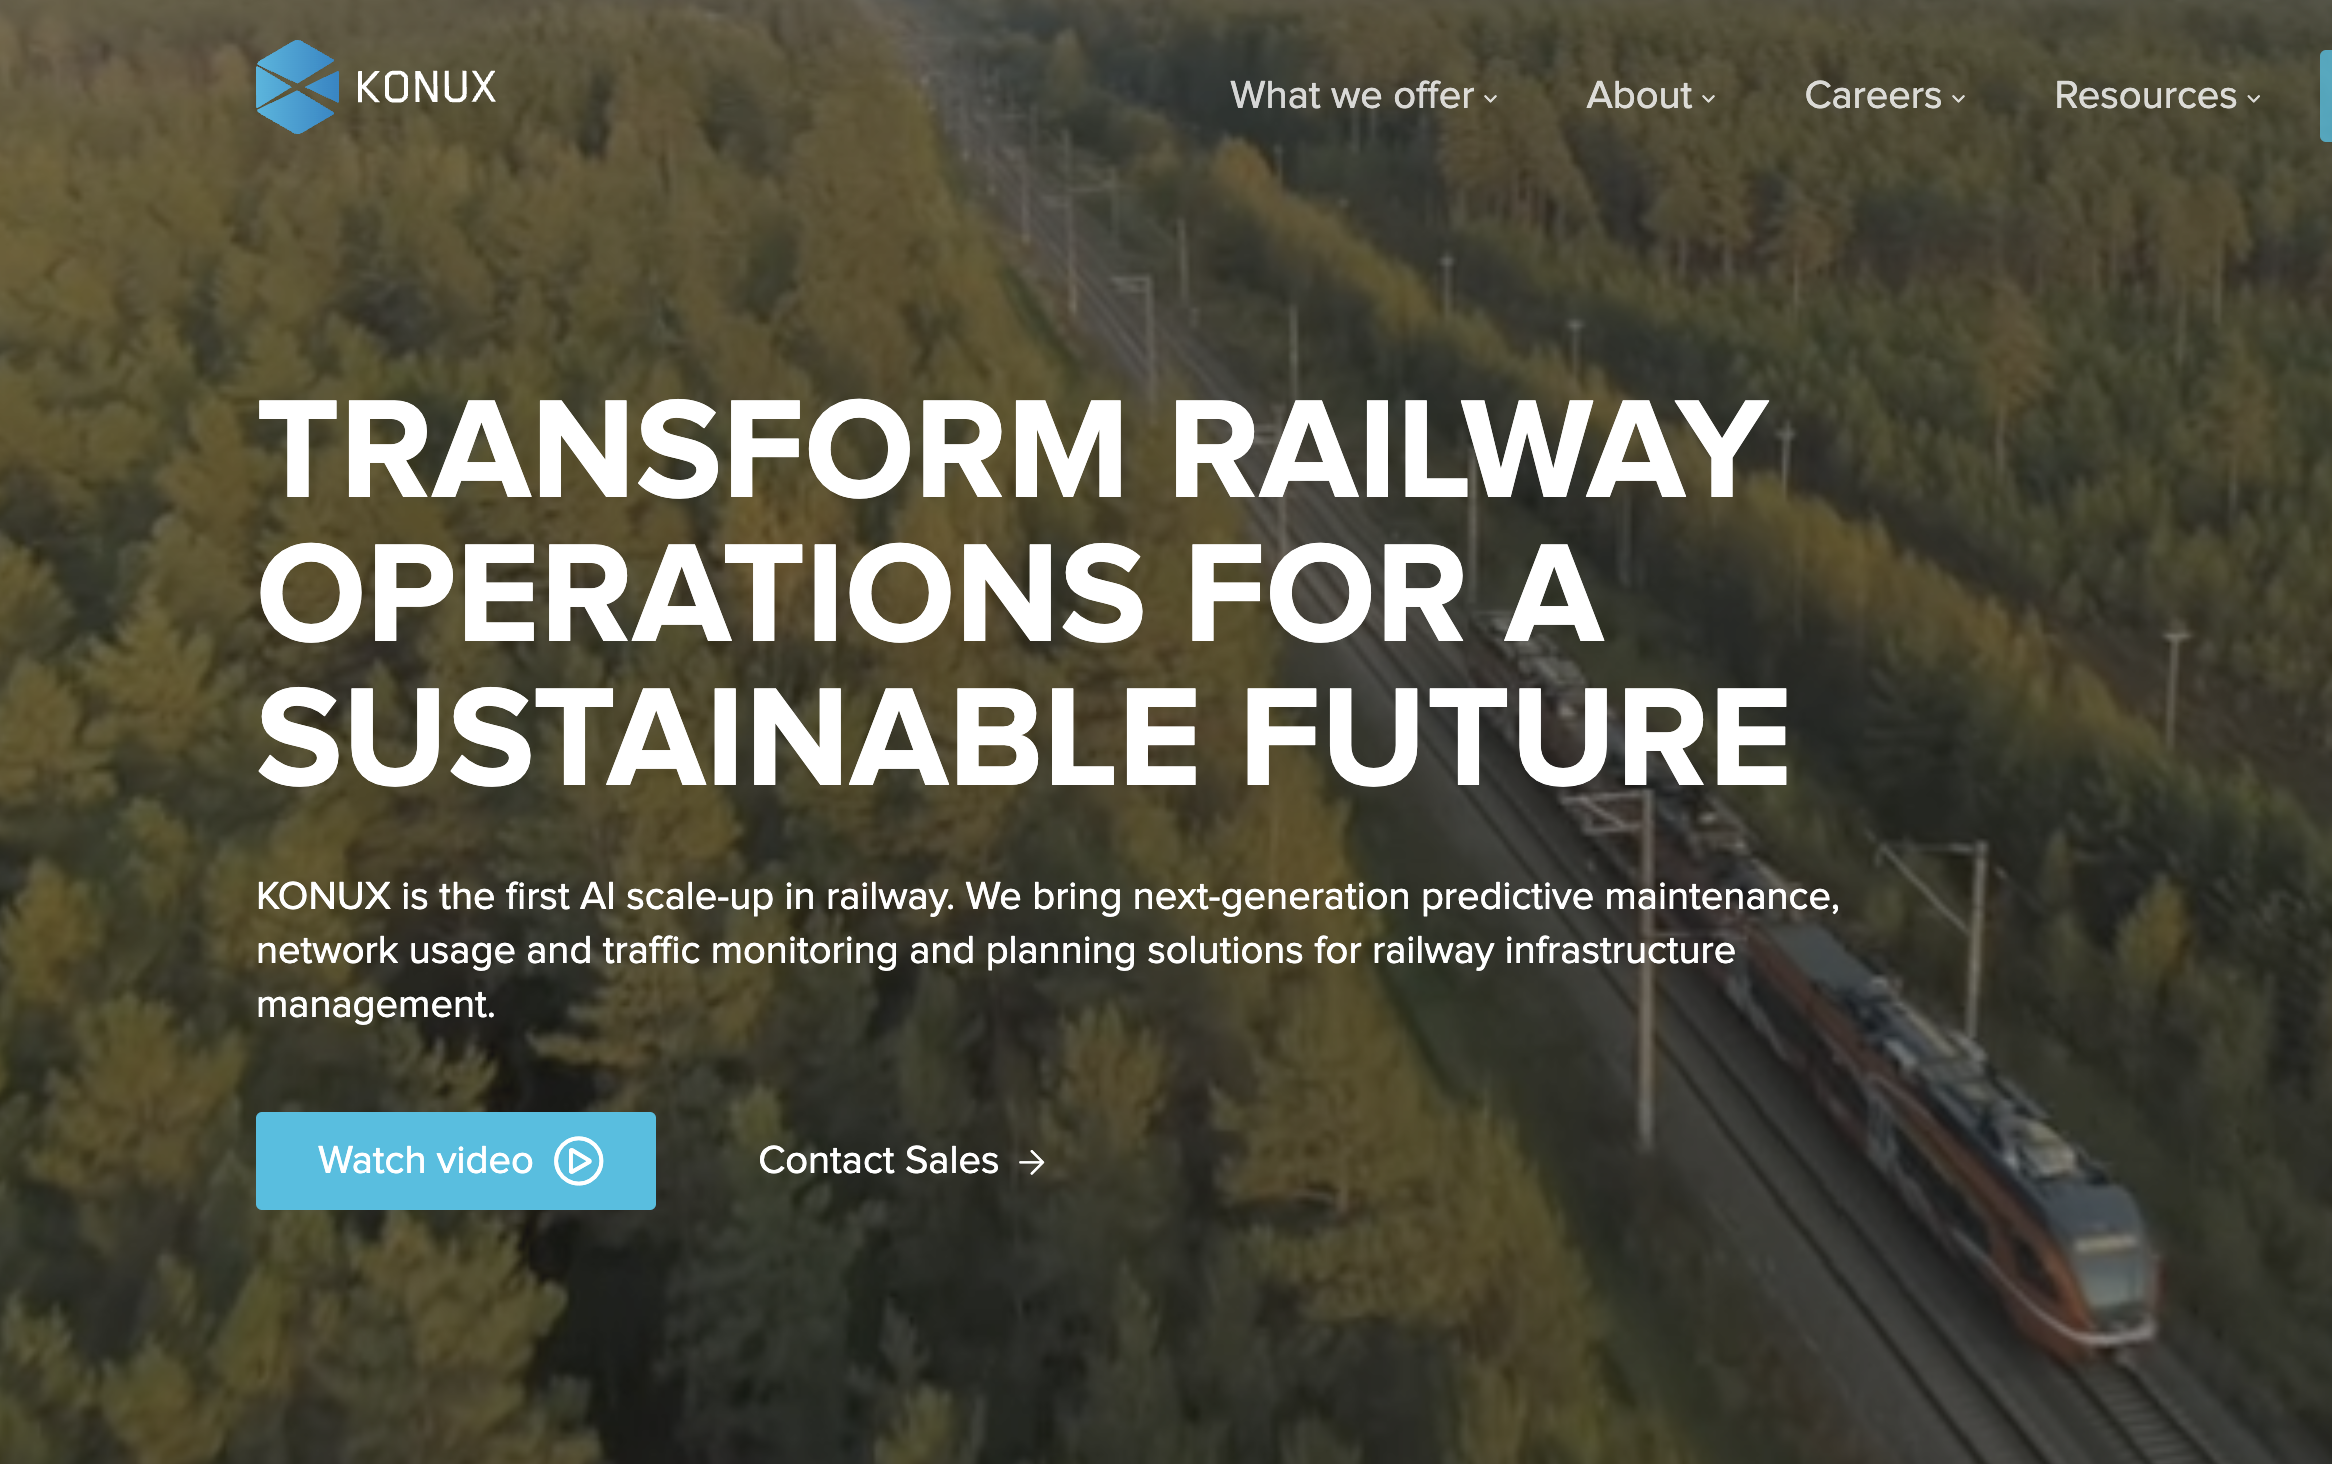 Konux using AI for IoT devices for optimizing railway